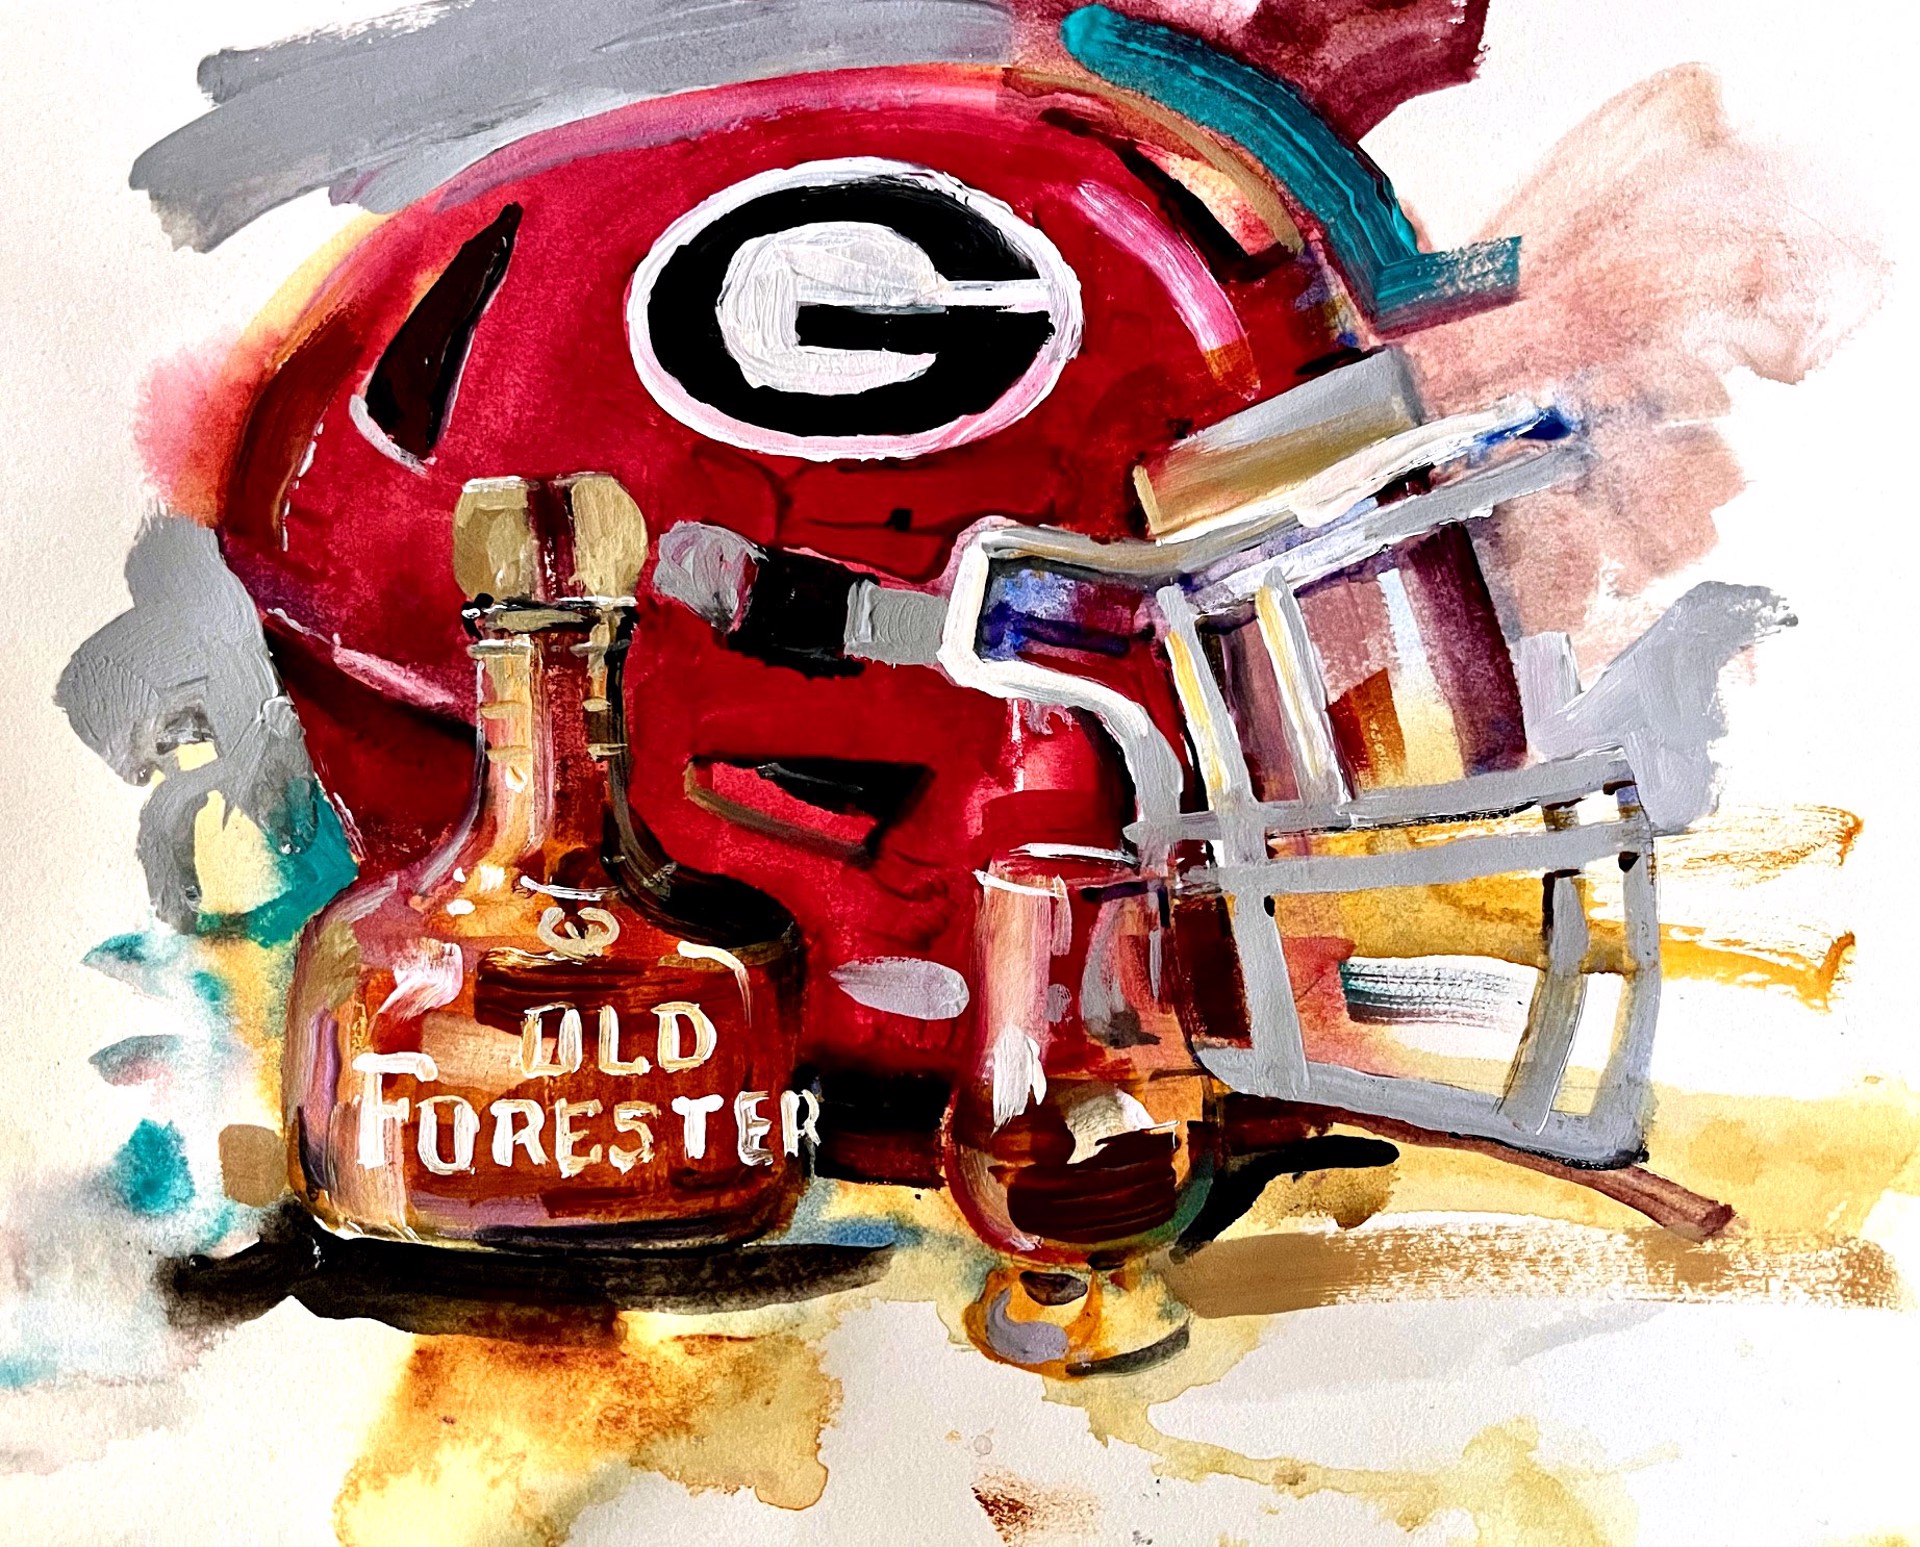 There's a New Dog in Town - UGA & Old Forester by Dirk Walker